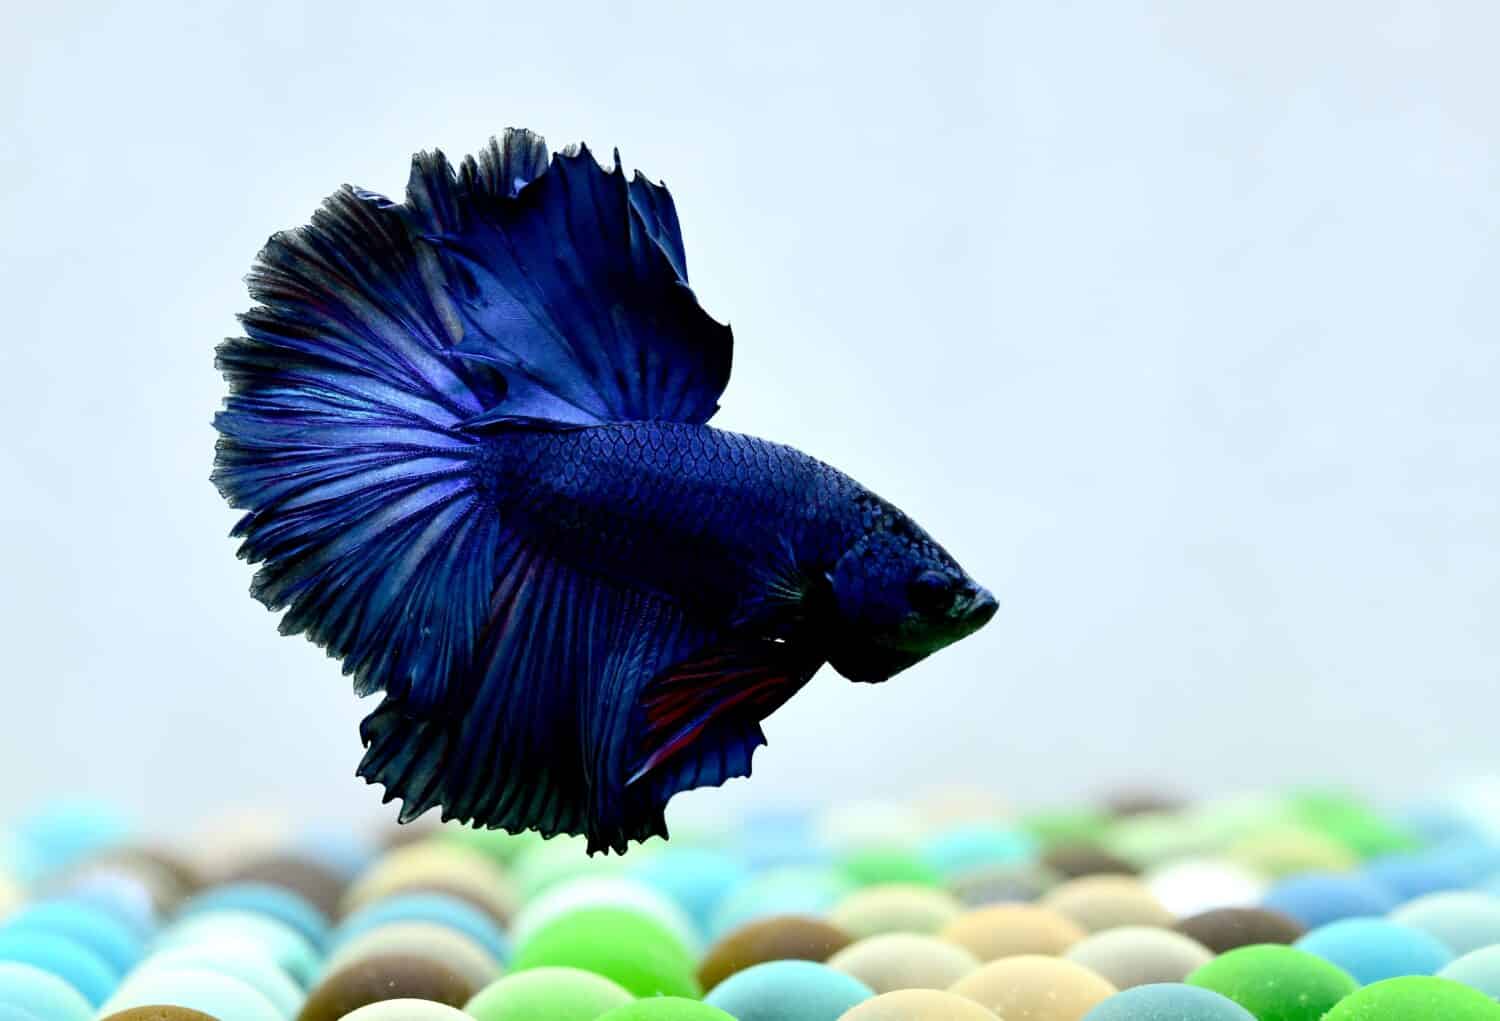 Betta Fish Eggs: Hatching Time, Appearance, and How Many Babies to